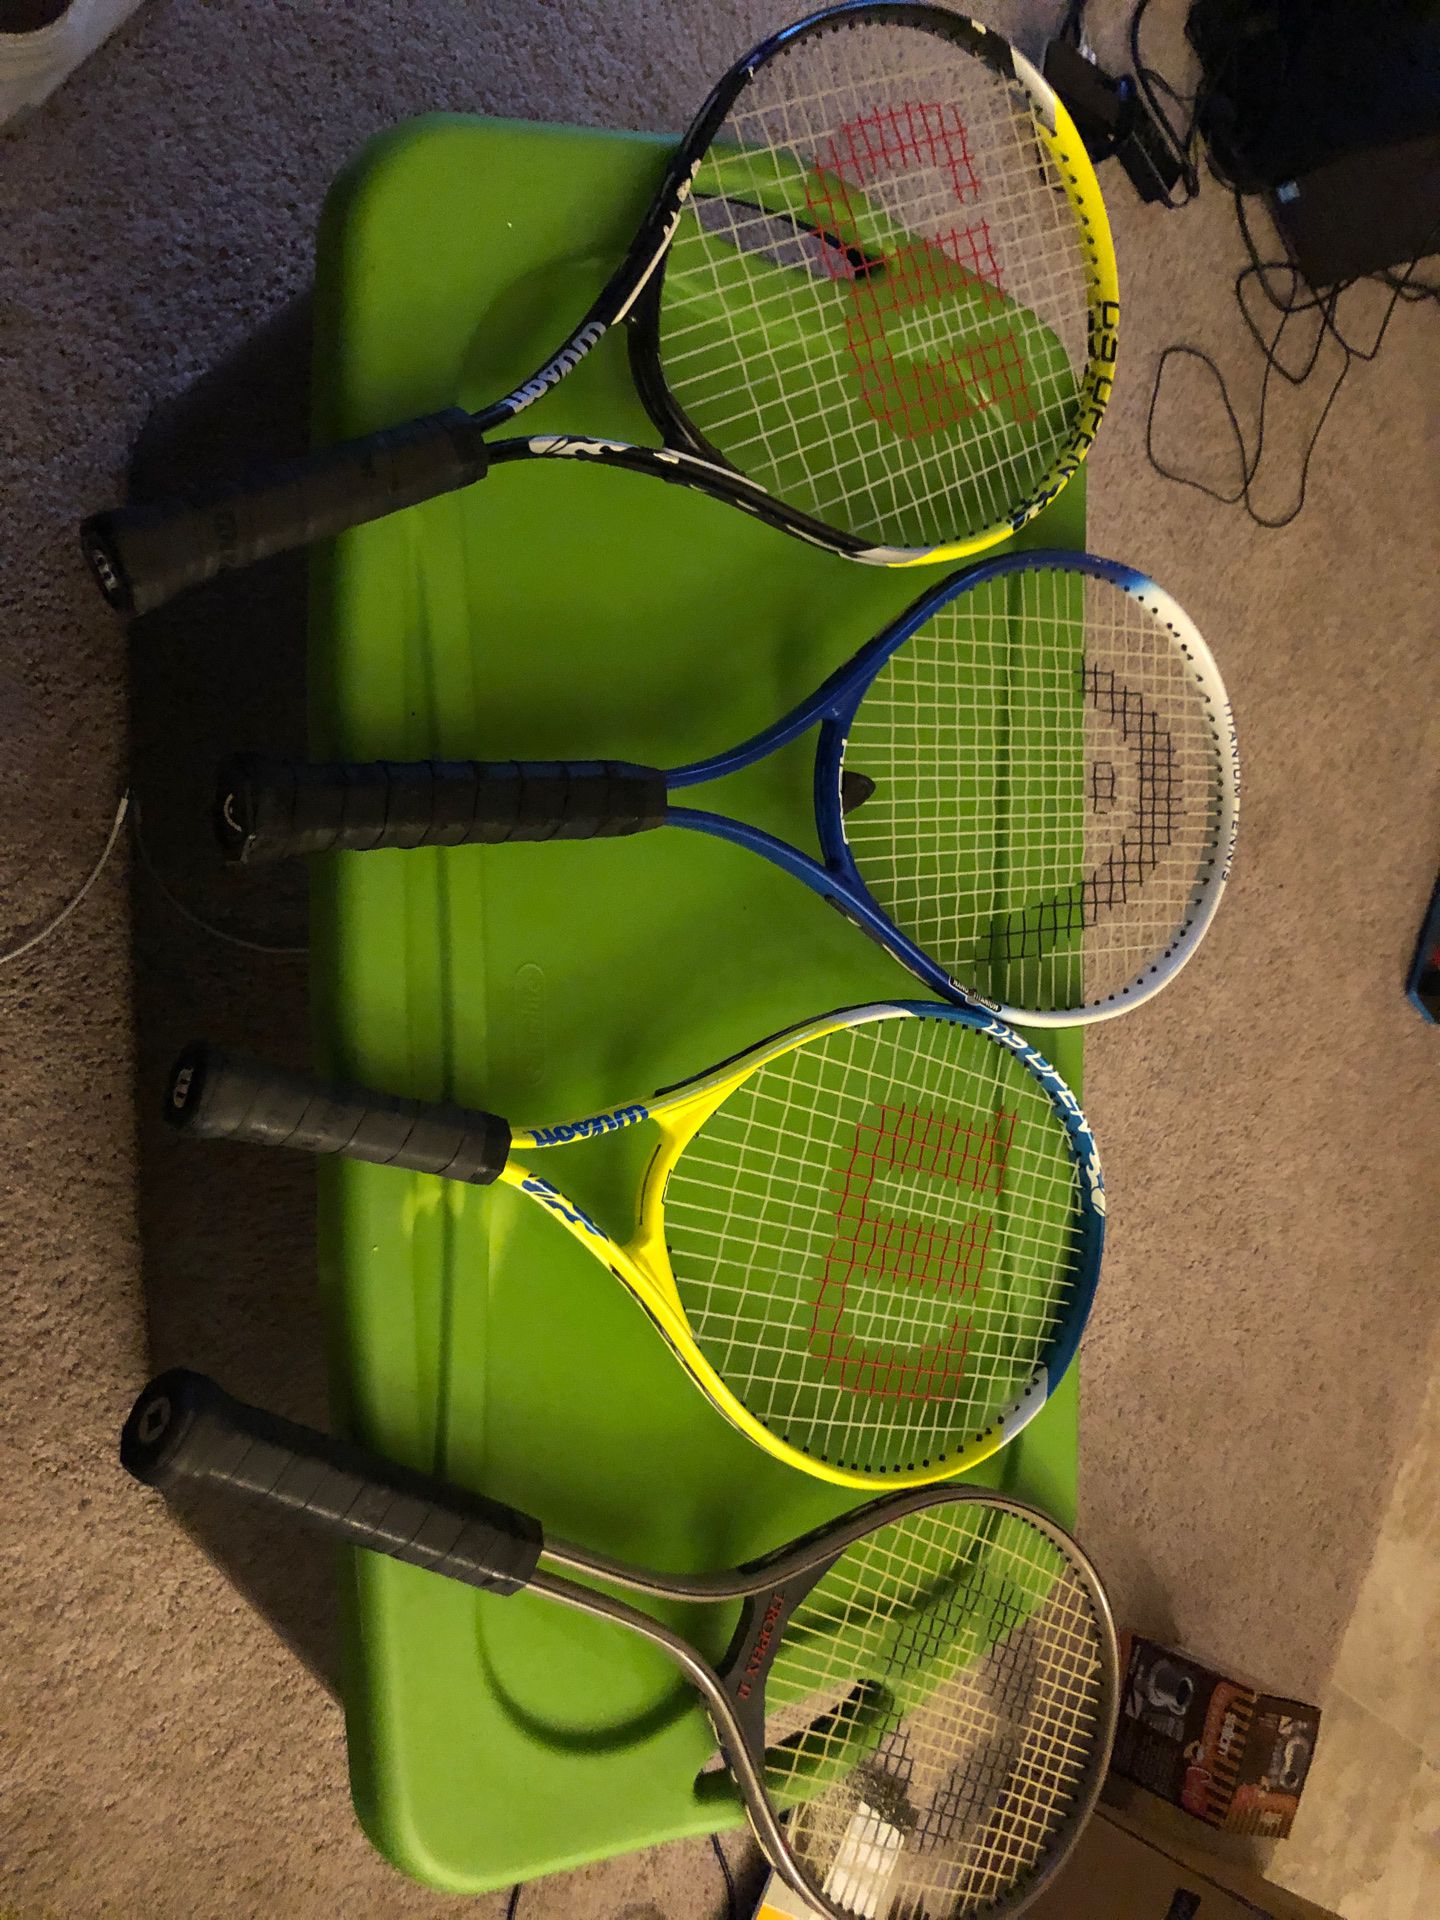 Brand new tennis rackets all of them for $200 (see page for individual price)